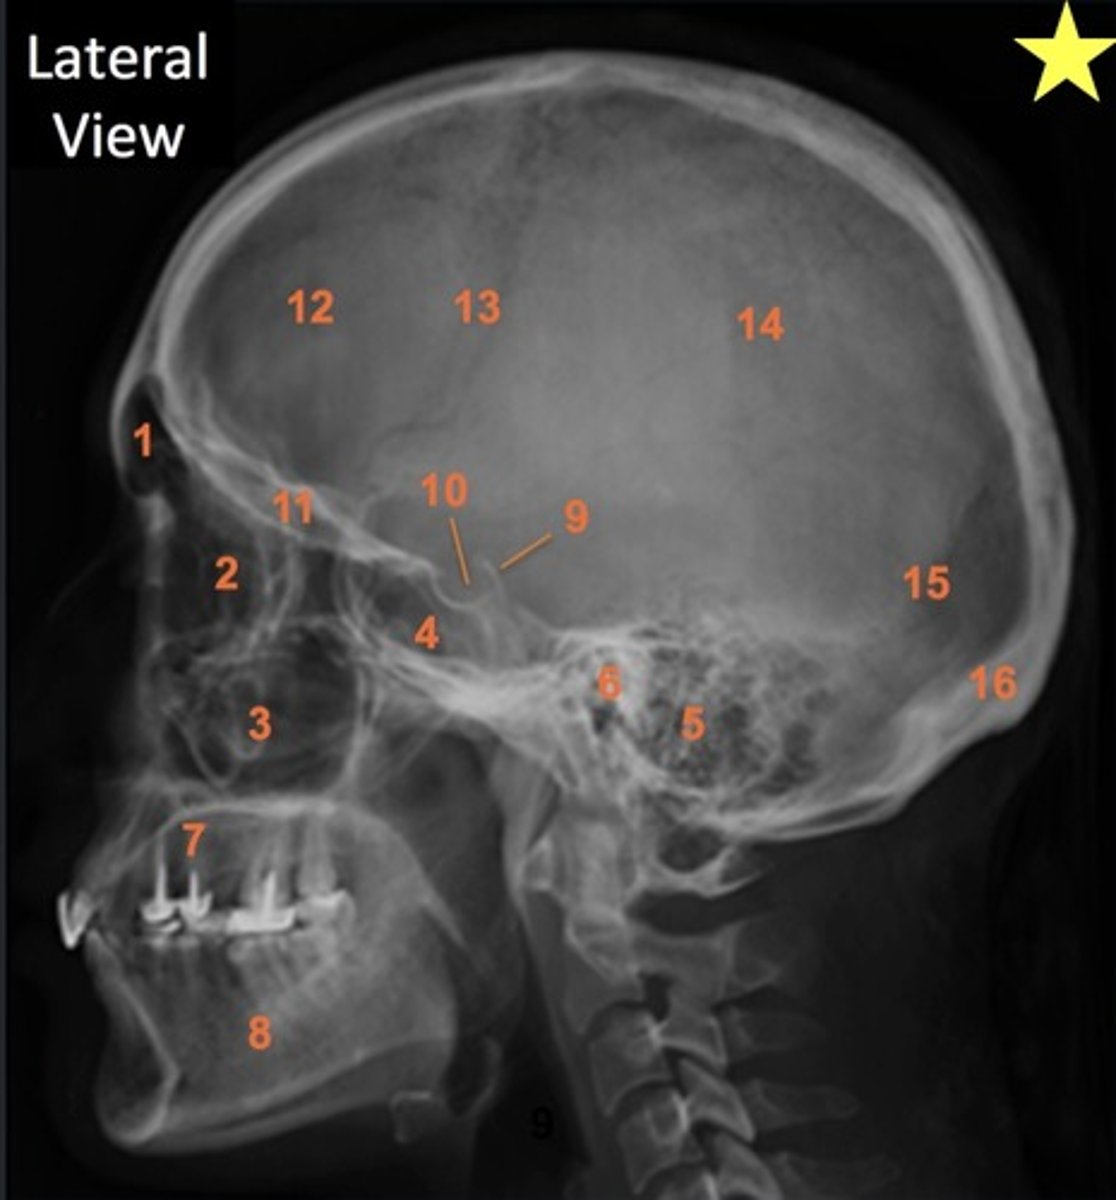 <p>Match the following structures to their corresponding numbers in order: Frontal sinuses, ethmoid sinuses, maxillary sinuses, and sphenoid sinuses</p>